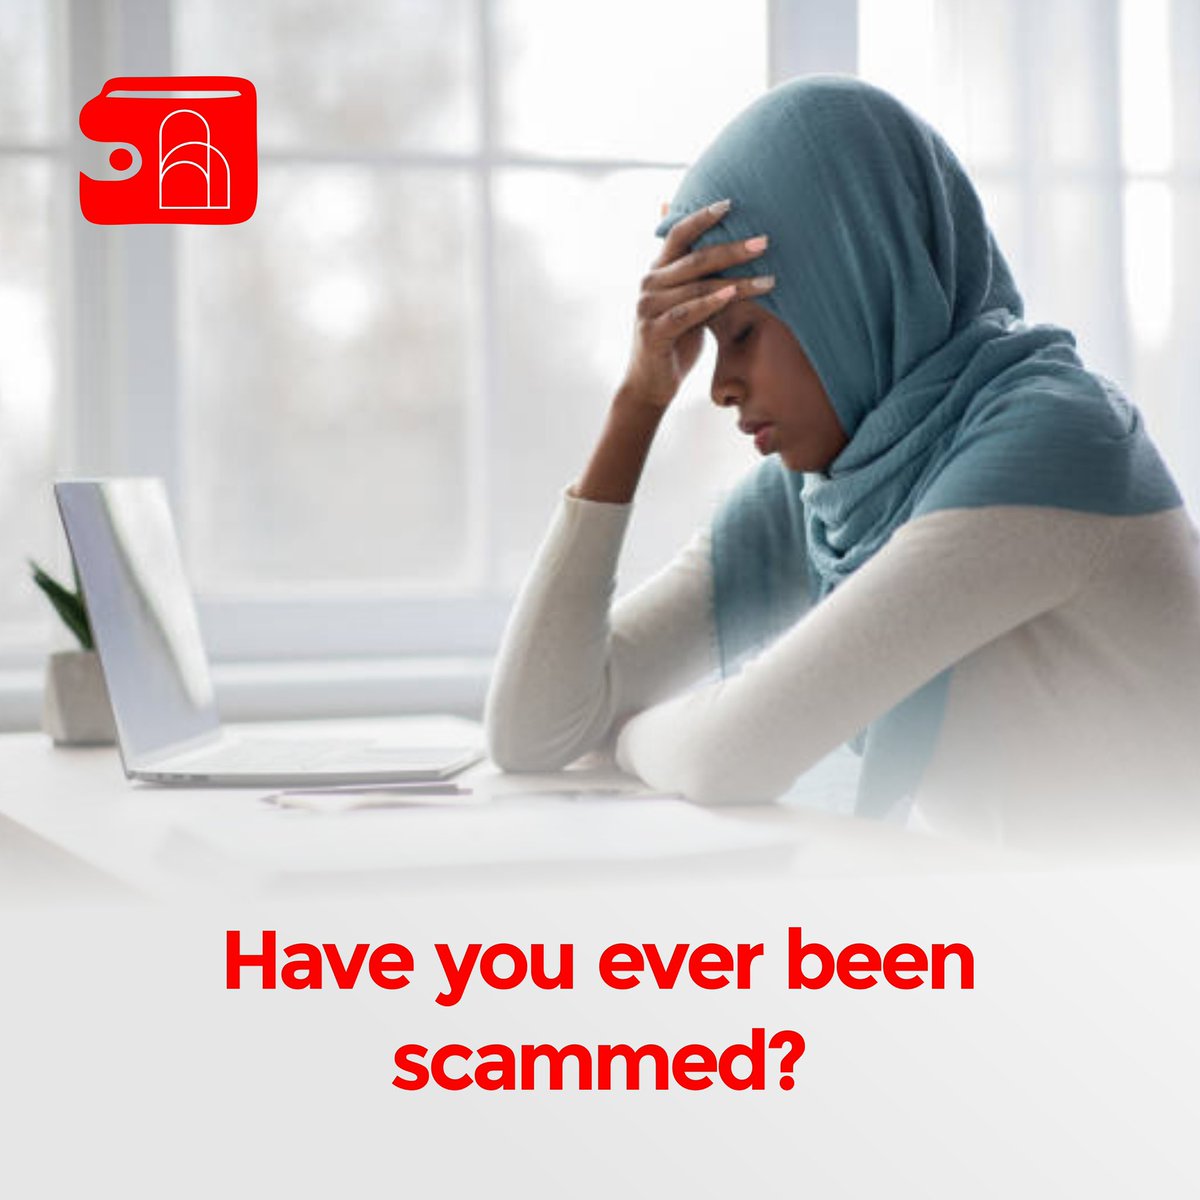 Have you ever been scammed on social media?
Tag an account that scammed you.